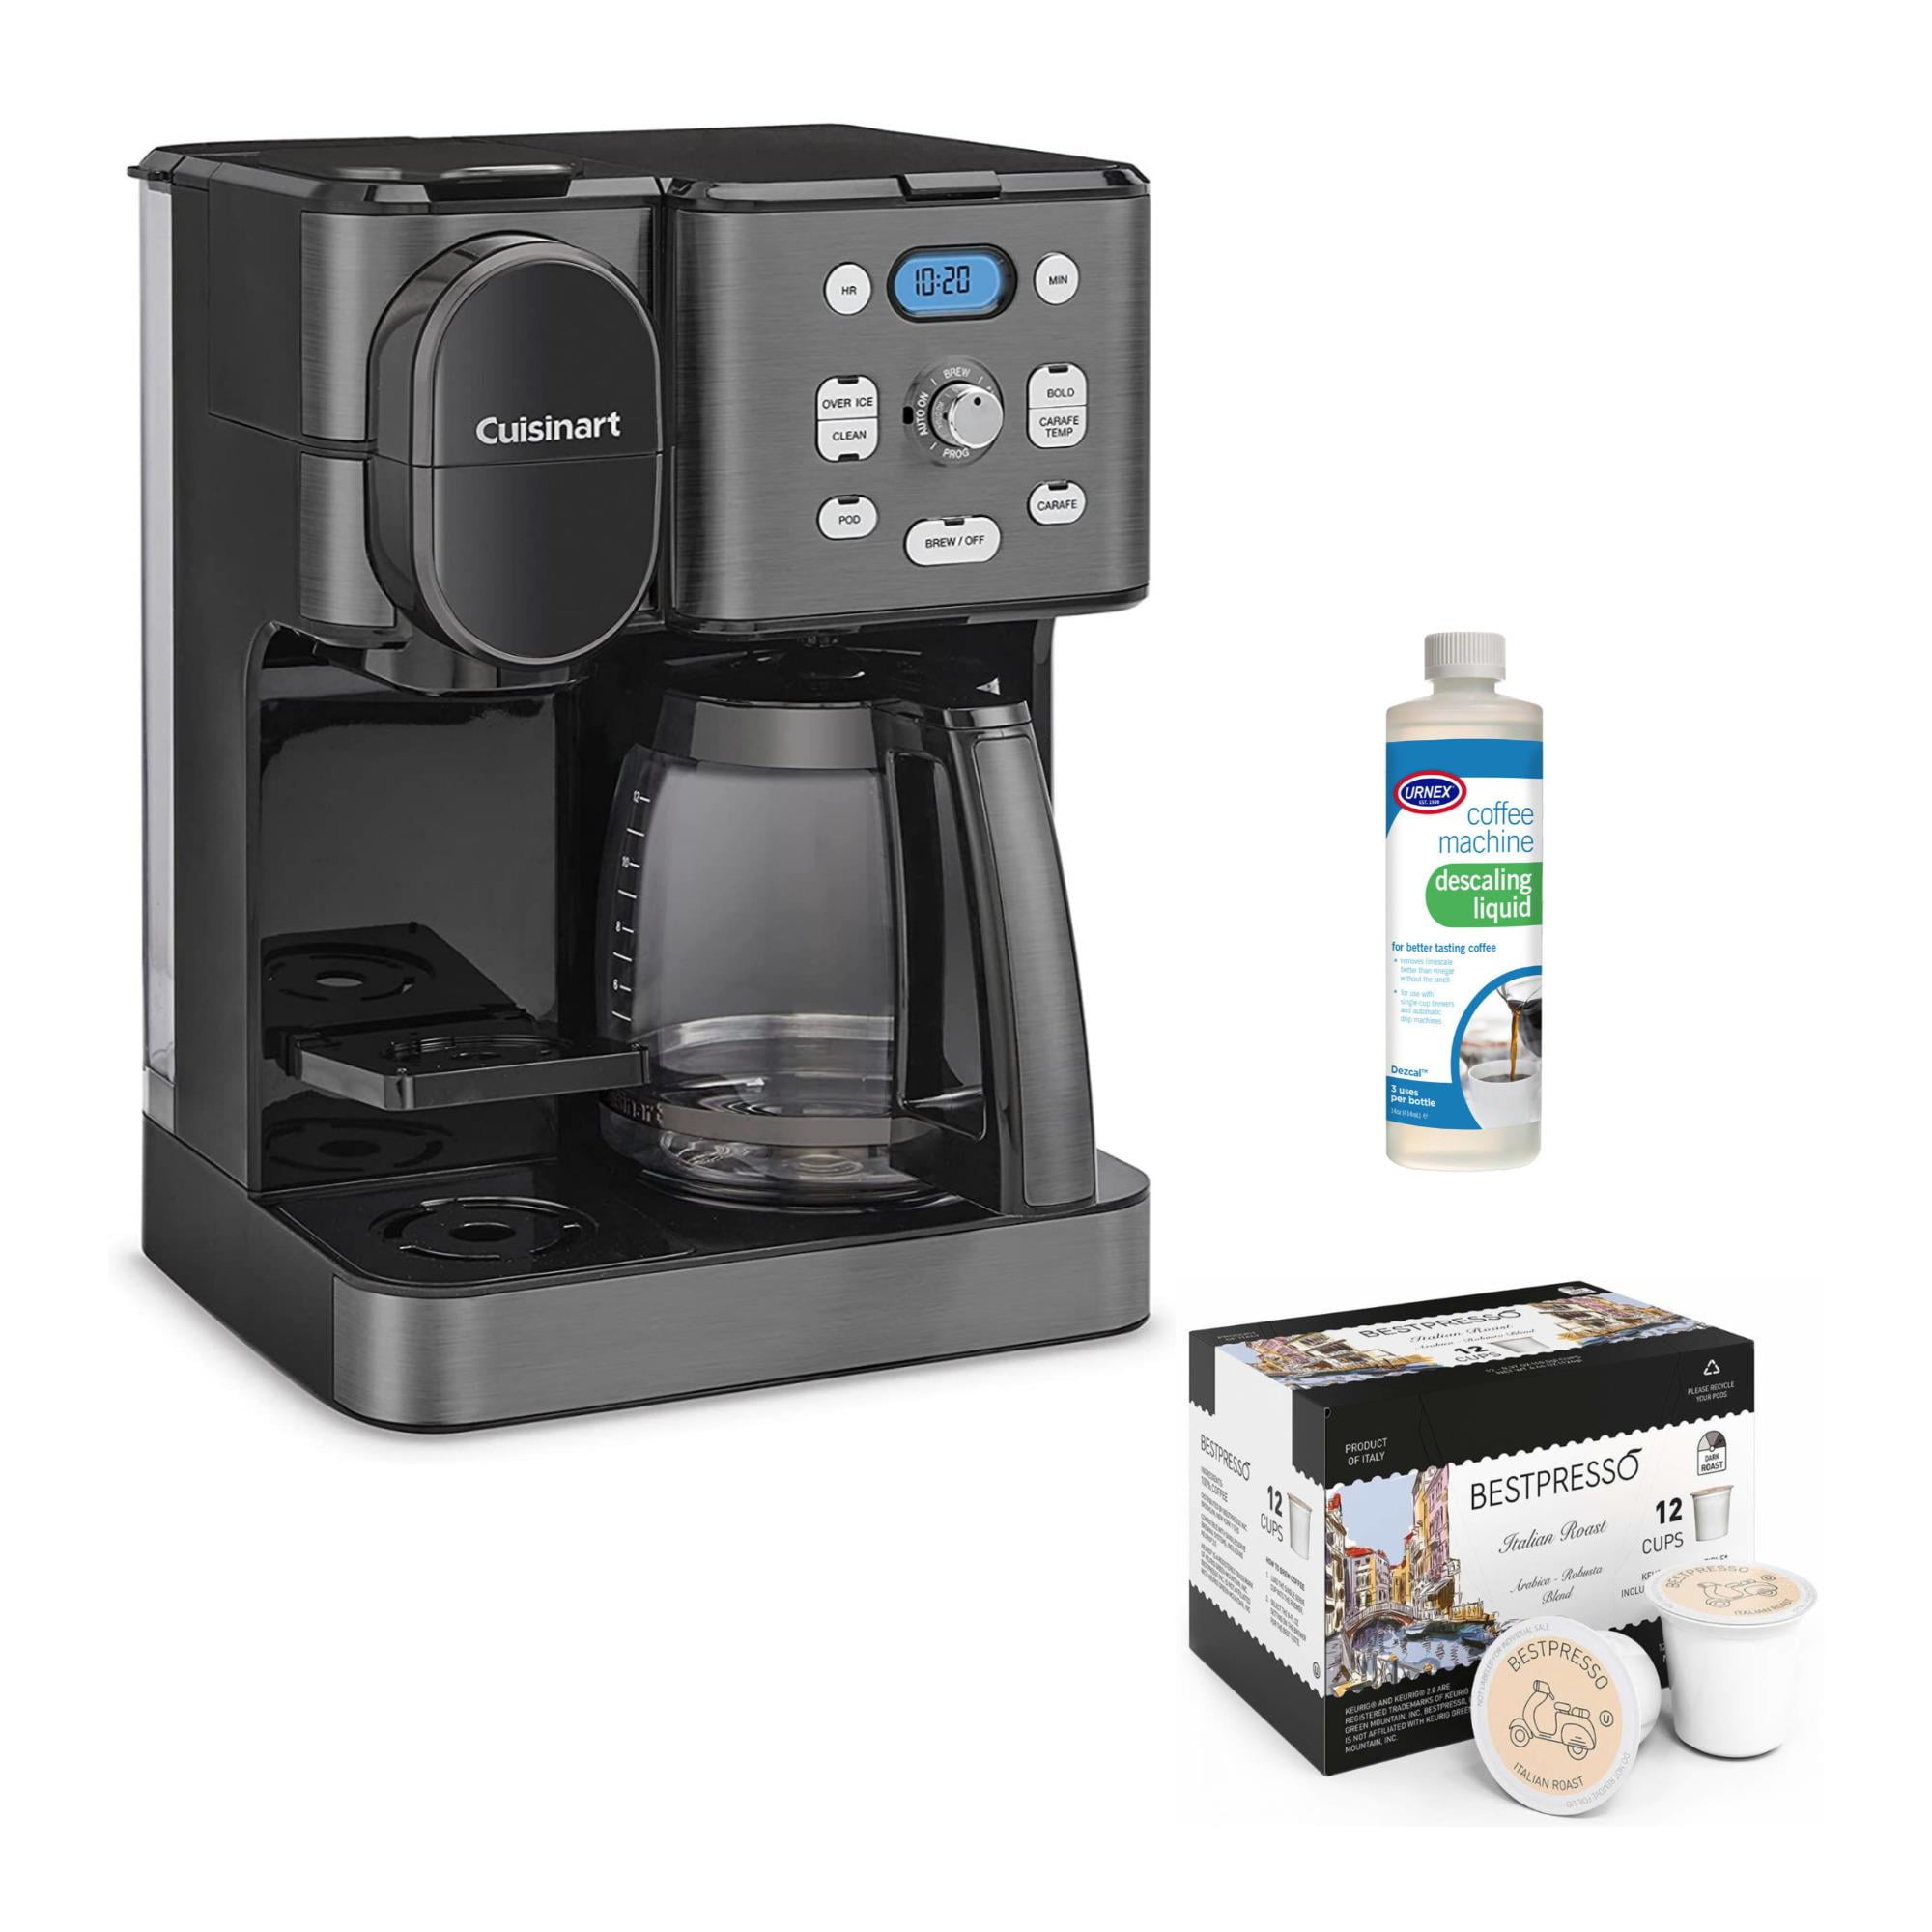 Cuisinart stainless Steel Center Combo Coffee Maker (Black) with